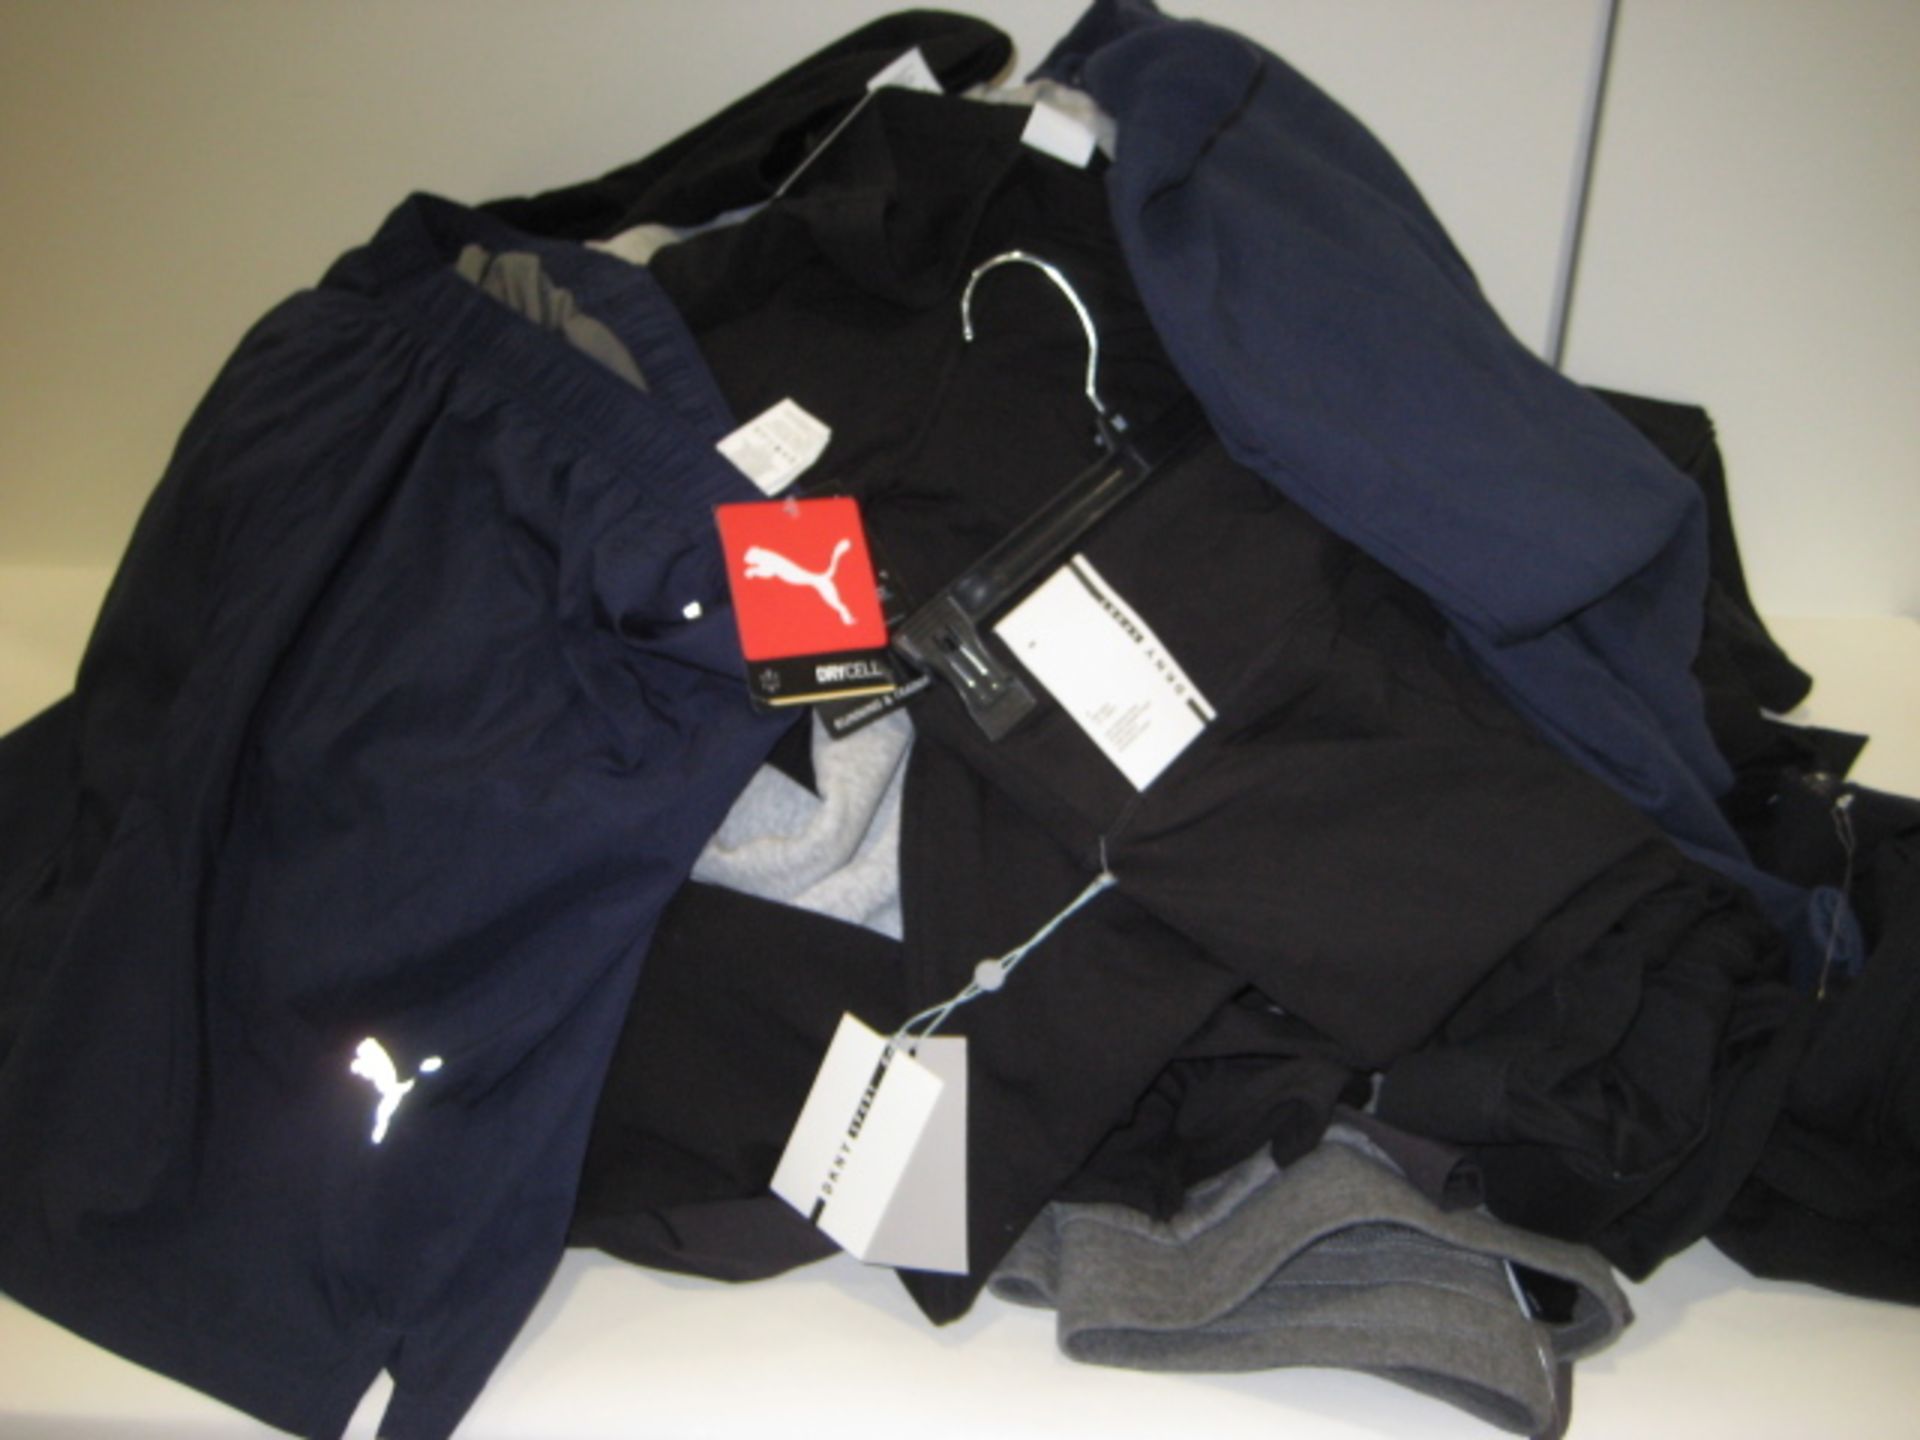 Large bag of ladies and gents sports wear incl. shorts, leggings, jogging bottoms, tops, etc. by